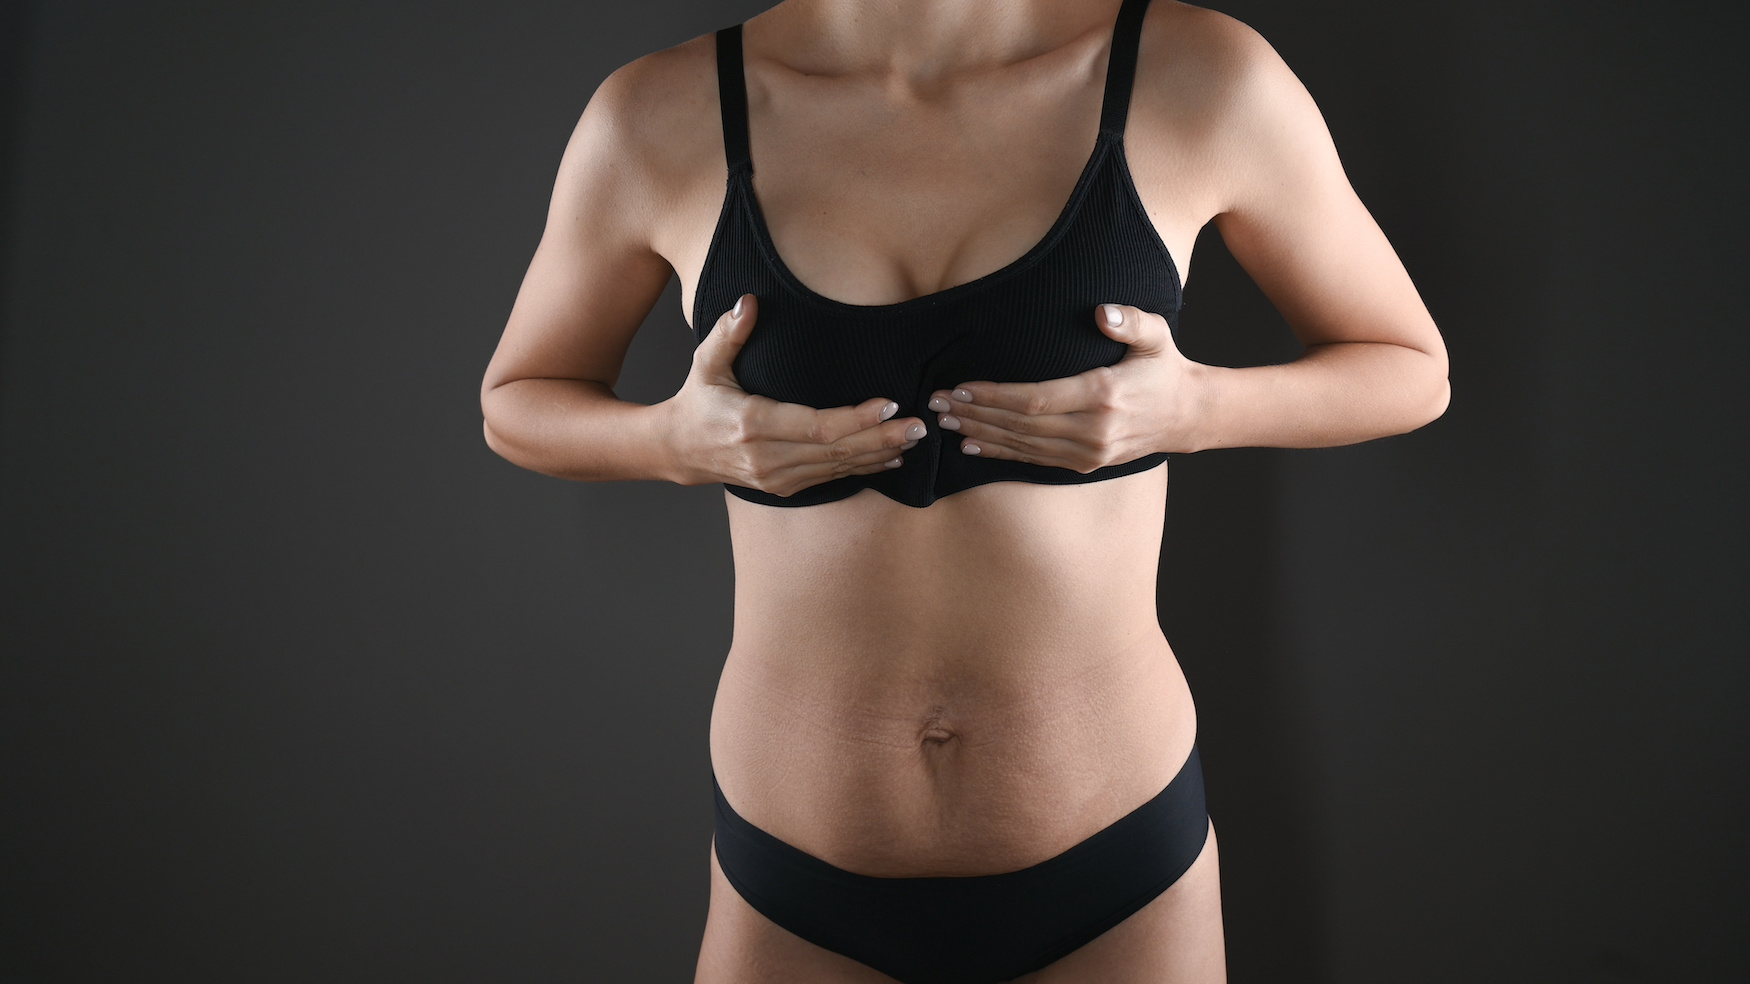 Who’s Most At-Risk For Diastasis Recti During Pregnancy?